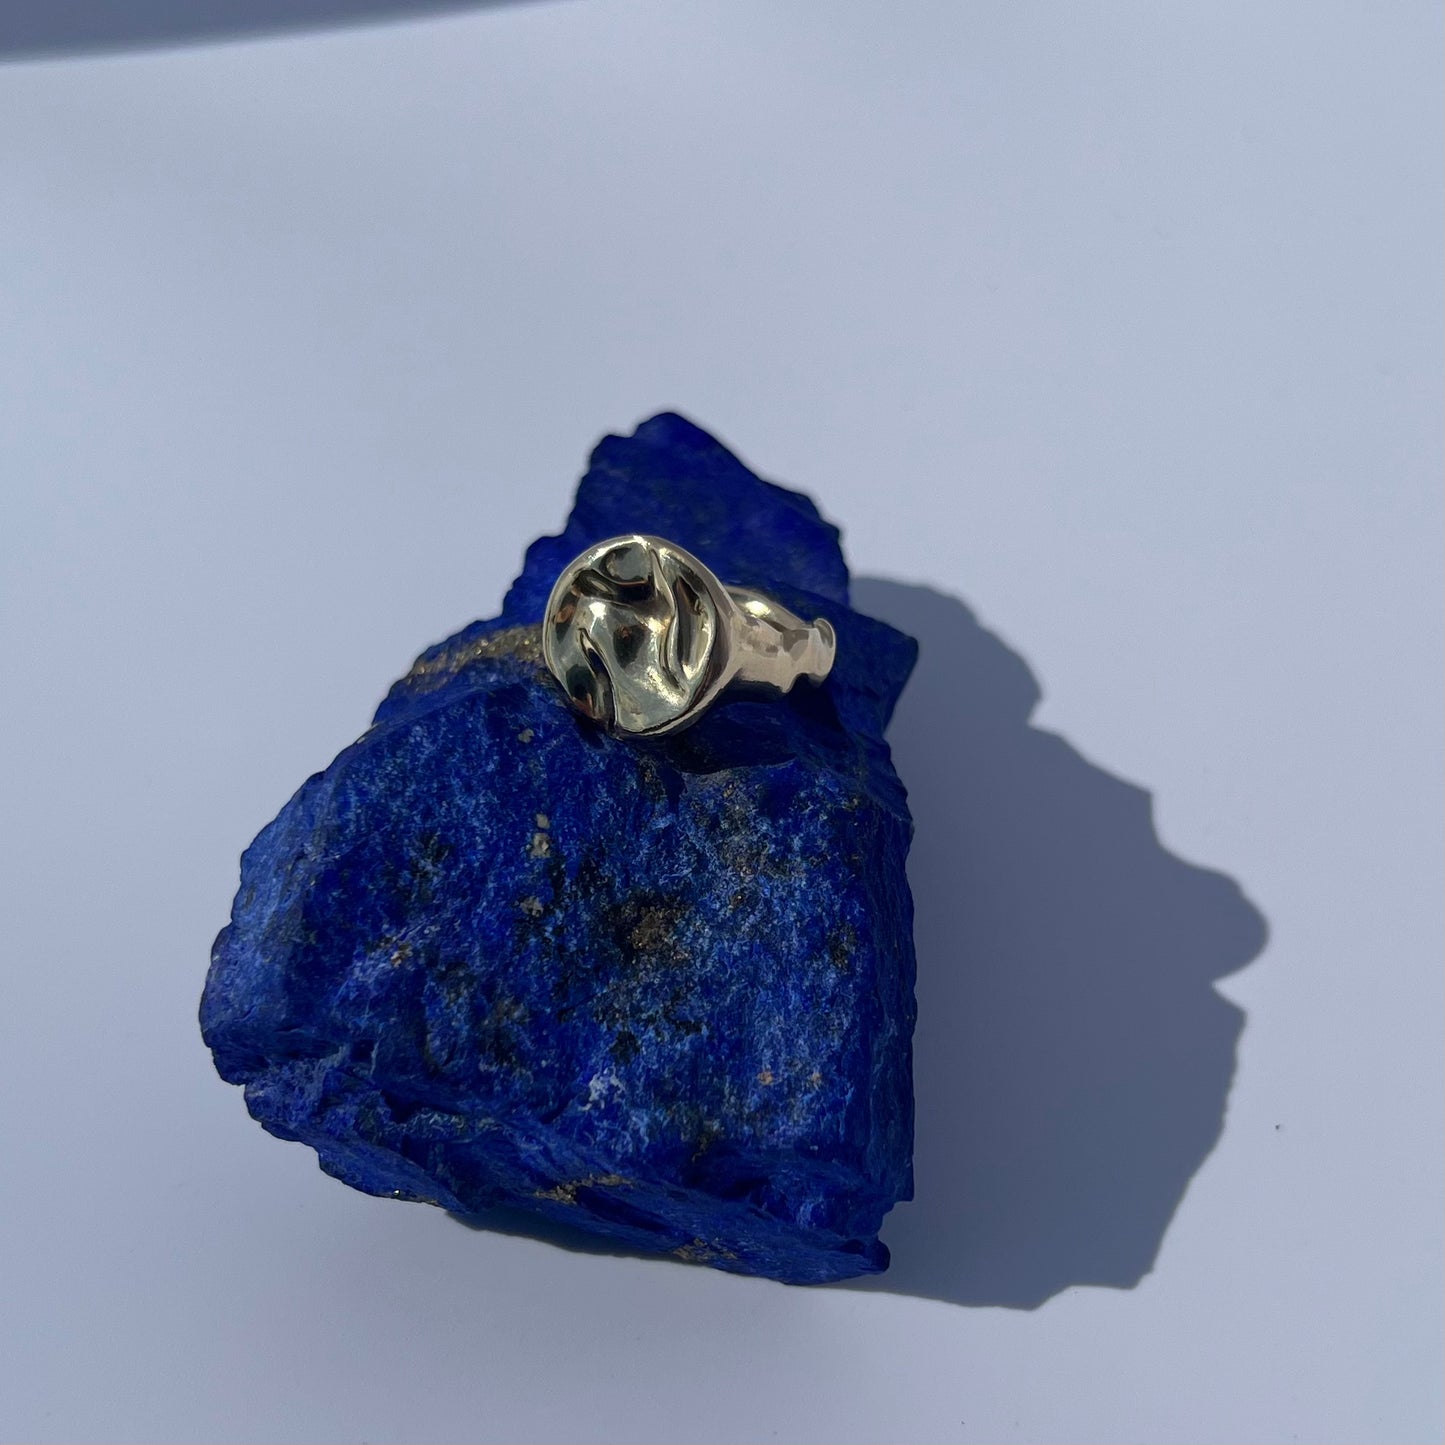 The 9ct yellow gold Splash ring sitting on a block of lapis lazuli on a white background.